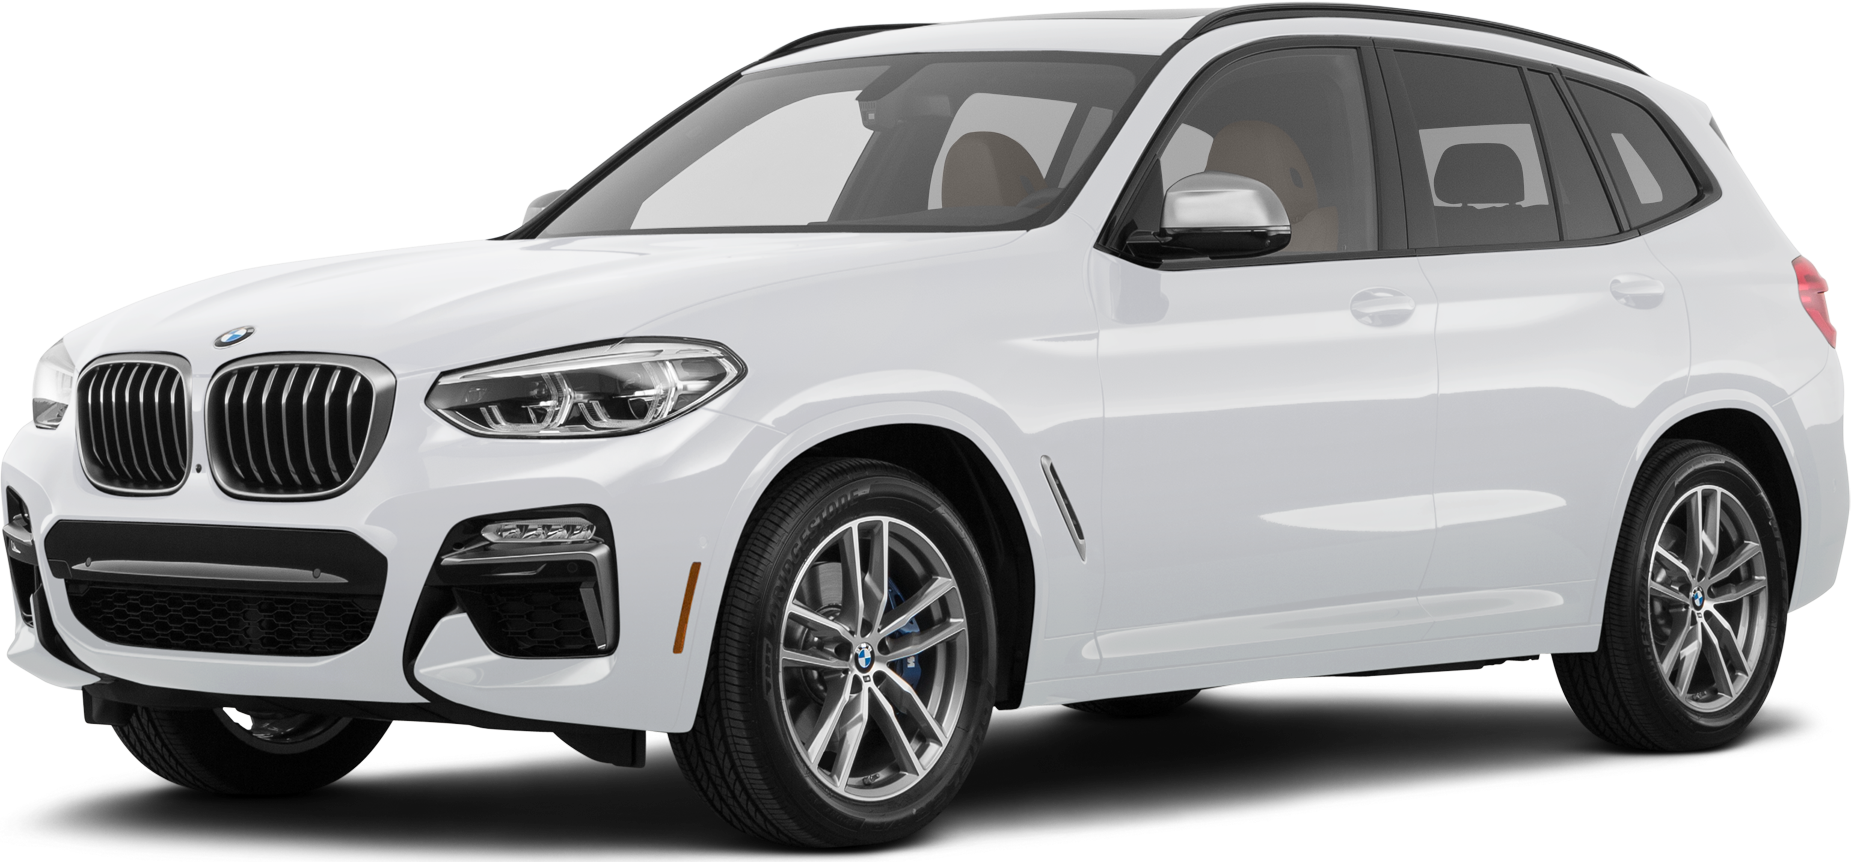 https://file.kelleybluebookimages.com/kbb/base/evox/CP/12702/2021-BMW-X3-front_12702_032_1851x862_300_cropped.png